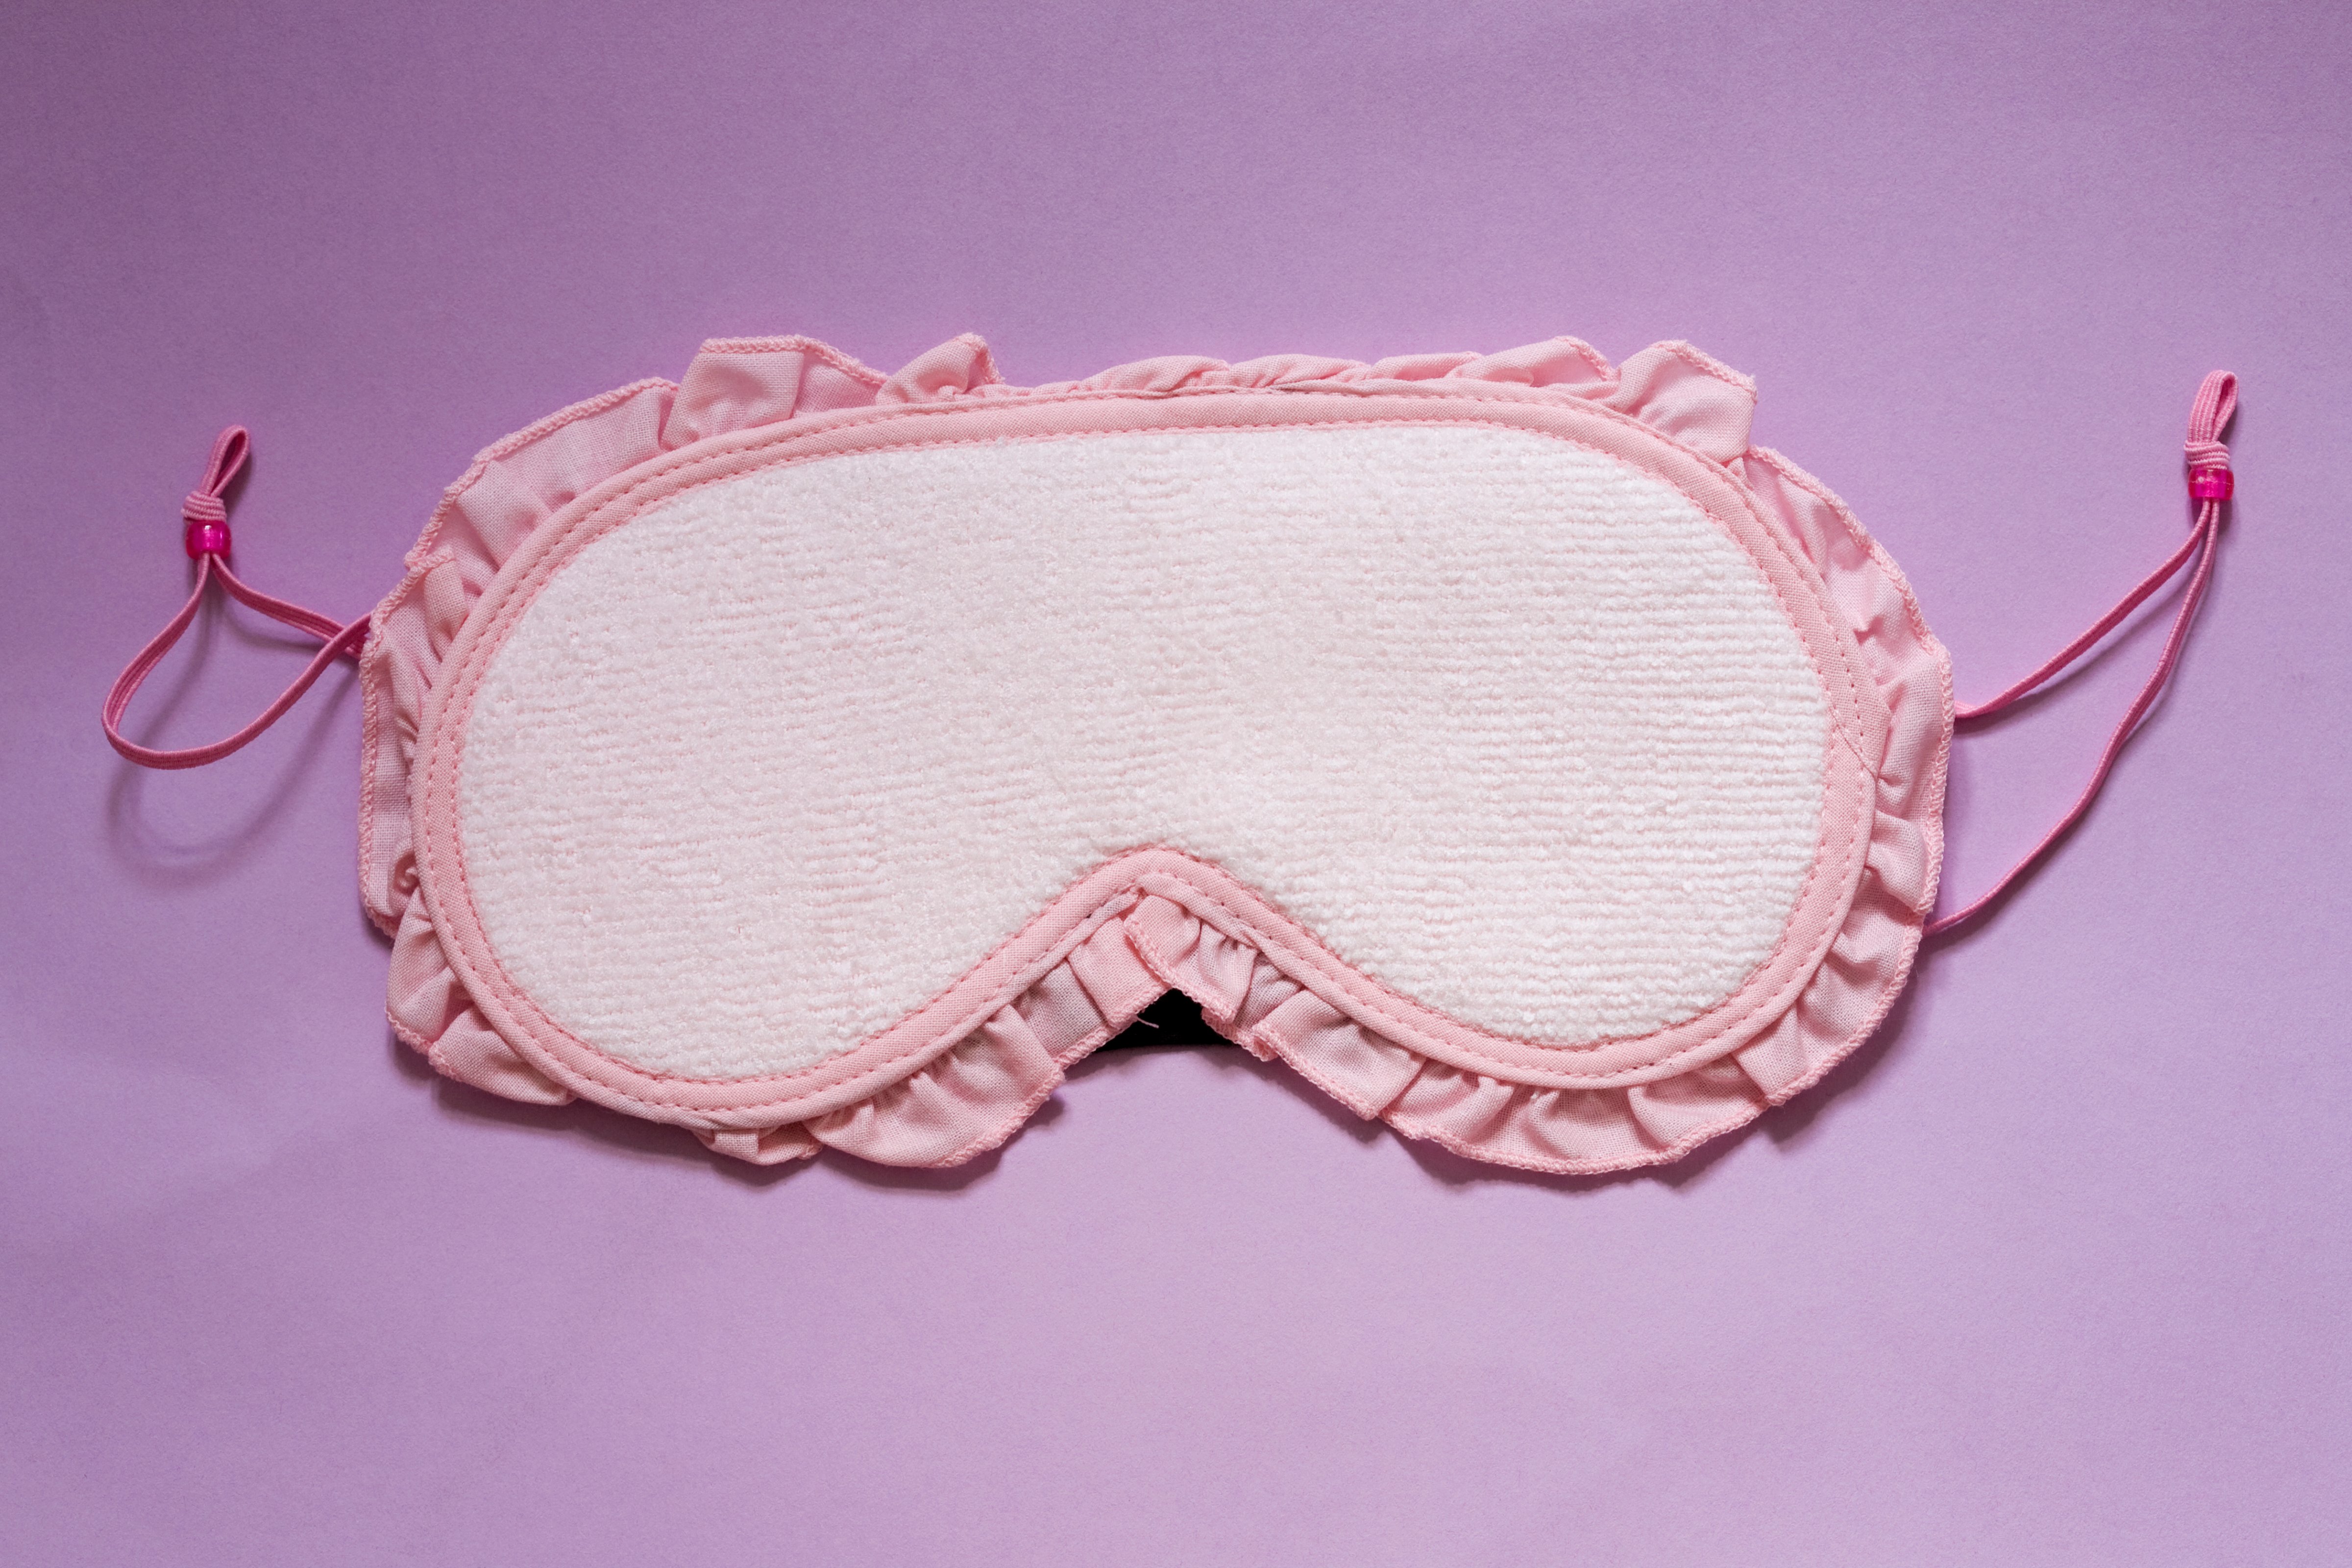 An eye mask (Getty Images)